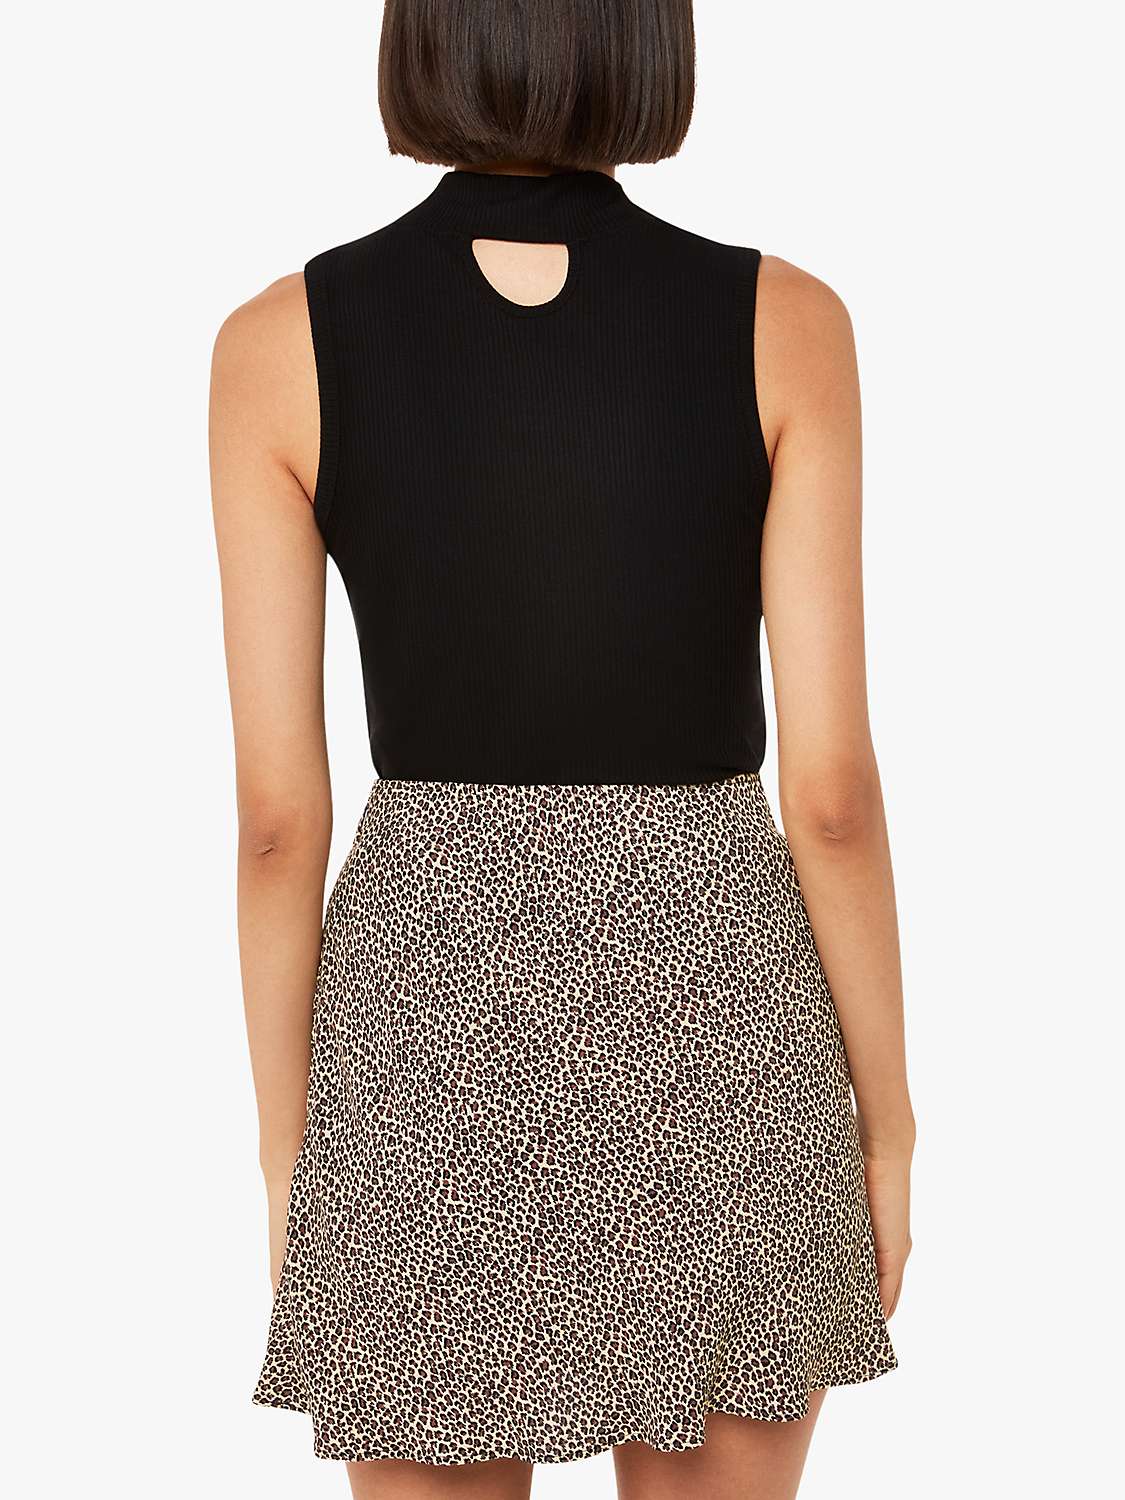 Buy Whistles Dashed Leopard Print Mini Skirt, Brown Online at johnlewis.com